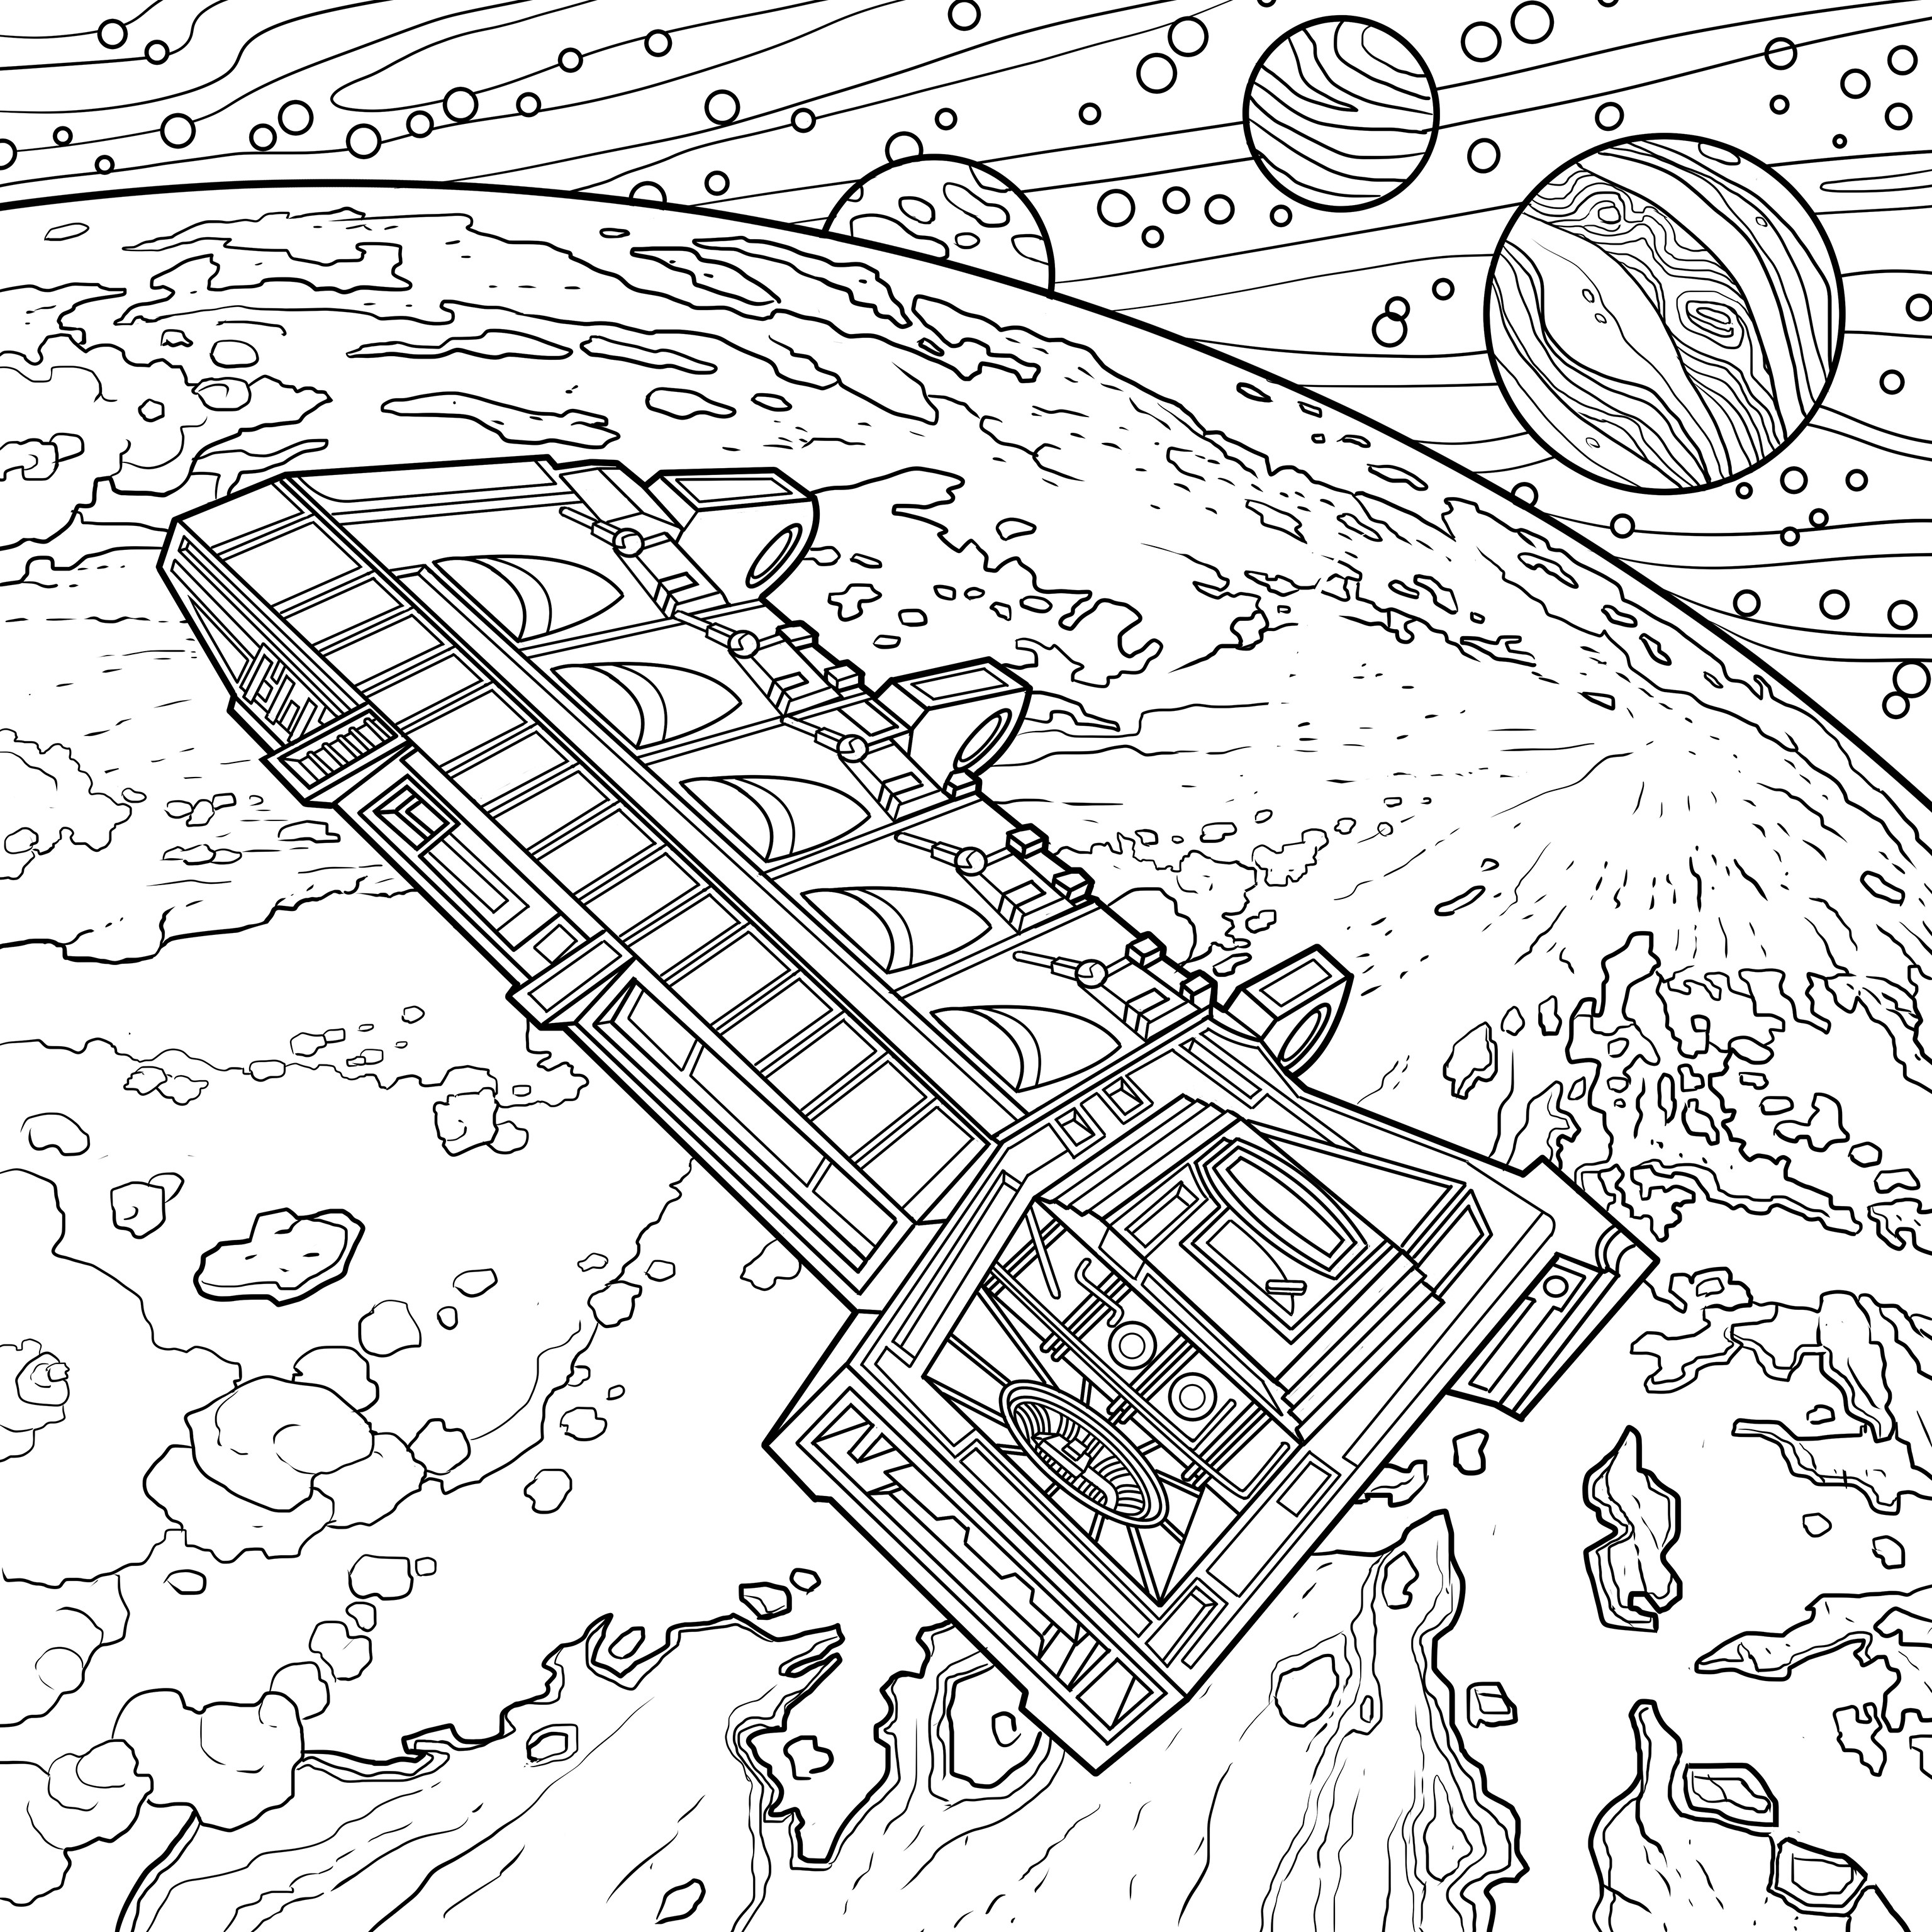 Alien: The Coloring Book features a franchise full of iconic sci-fi imagery  – borg